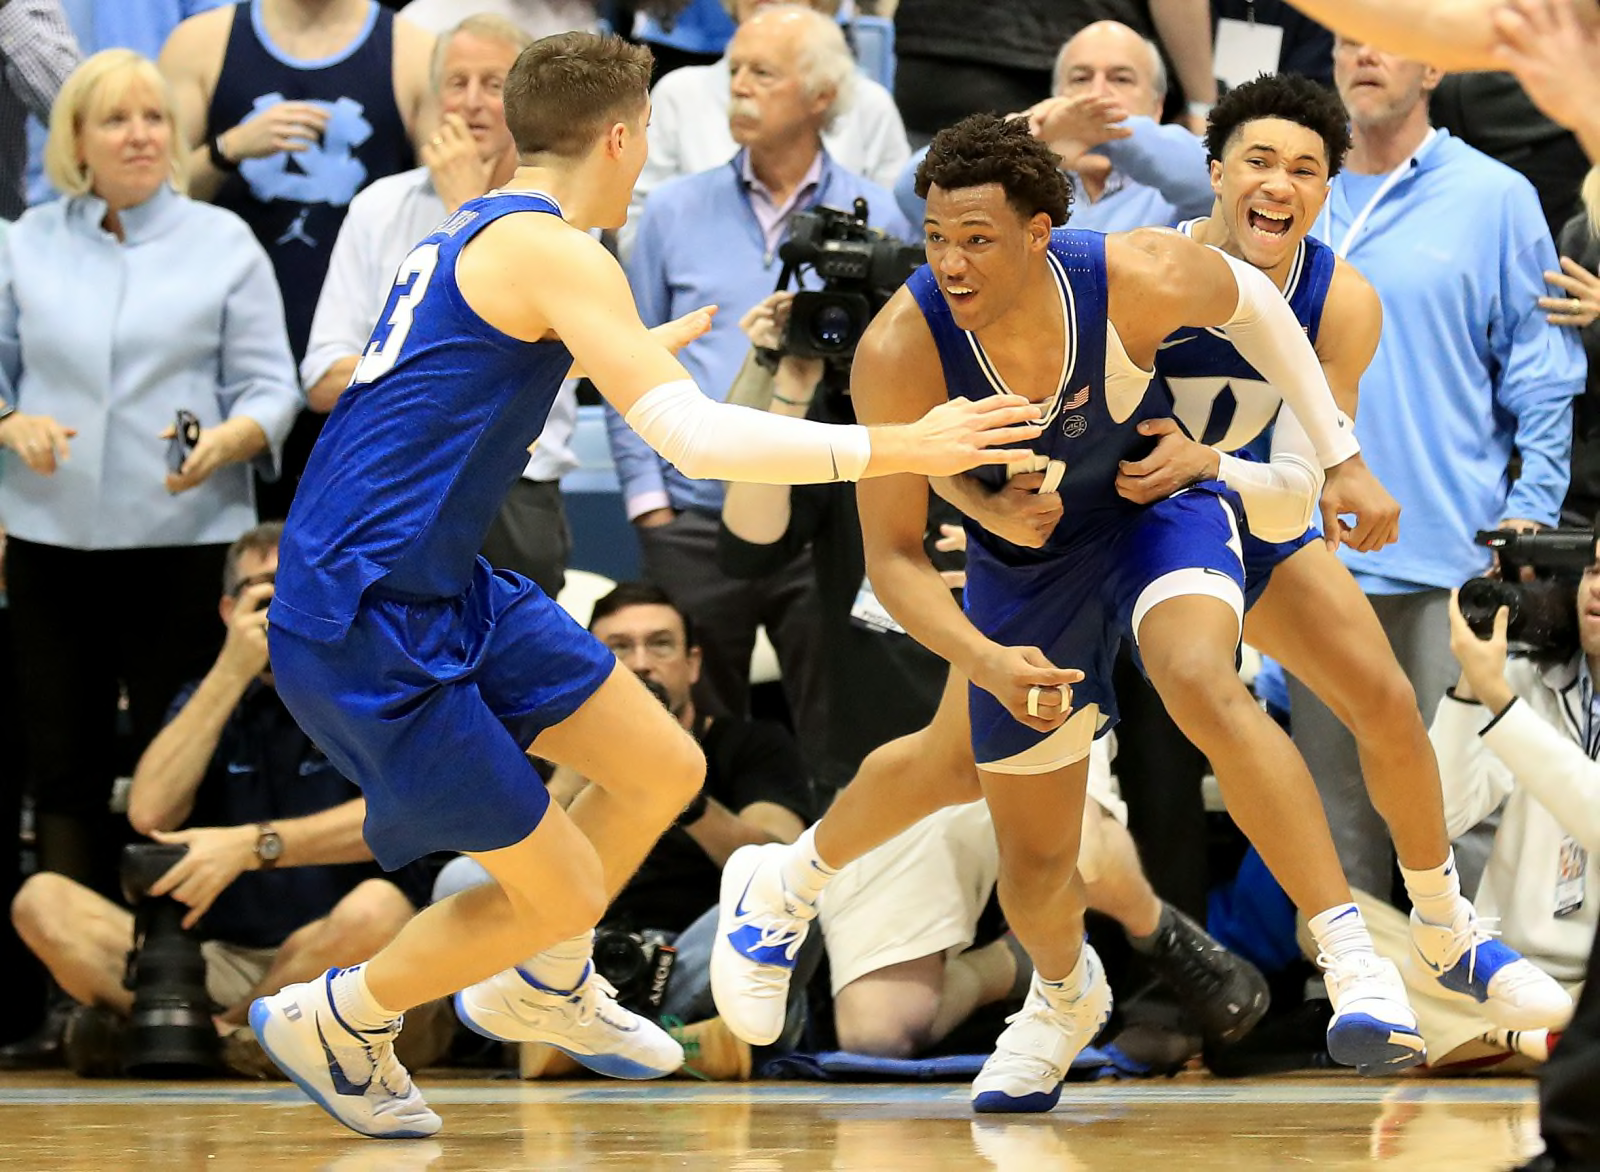 Unc Basketball Roster 2019-2020 - College basketball's top-25 for the